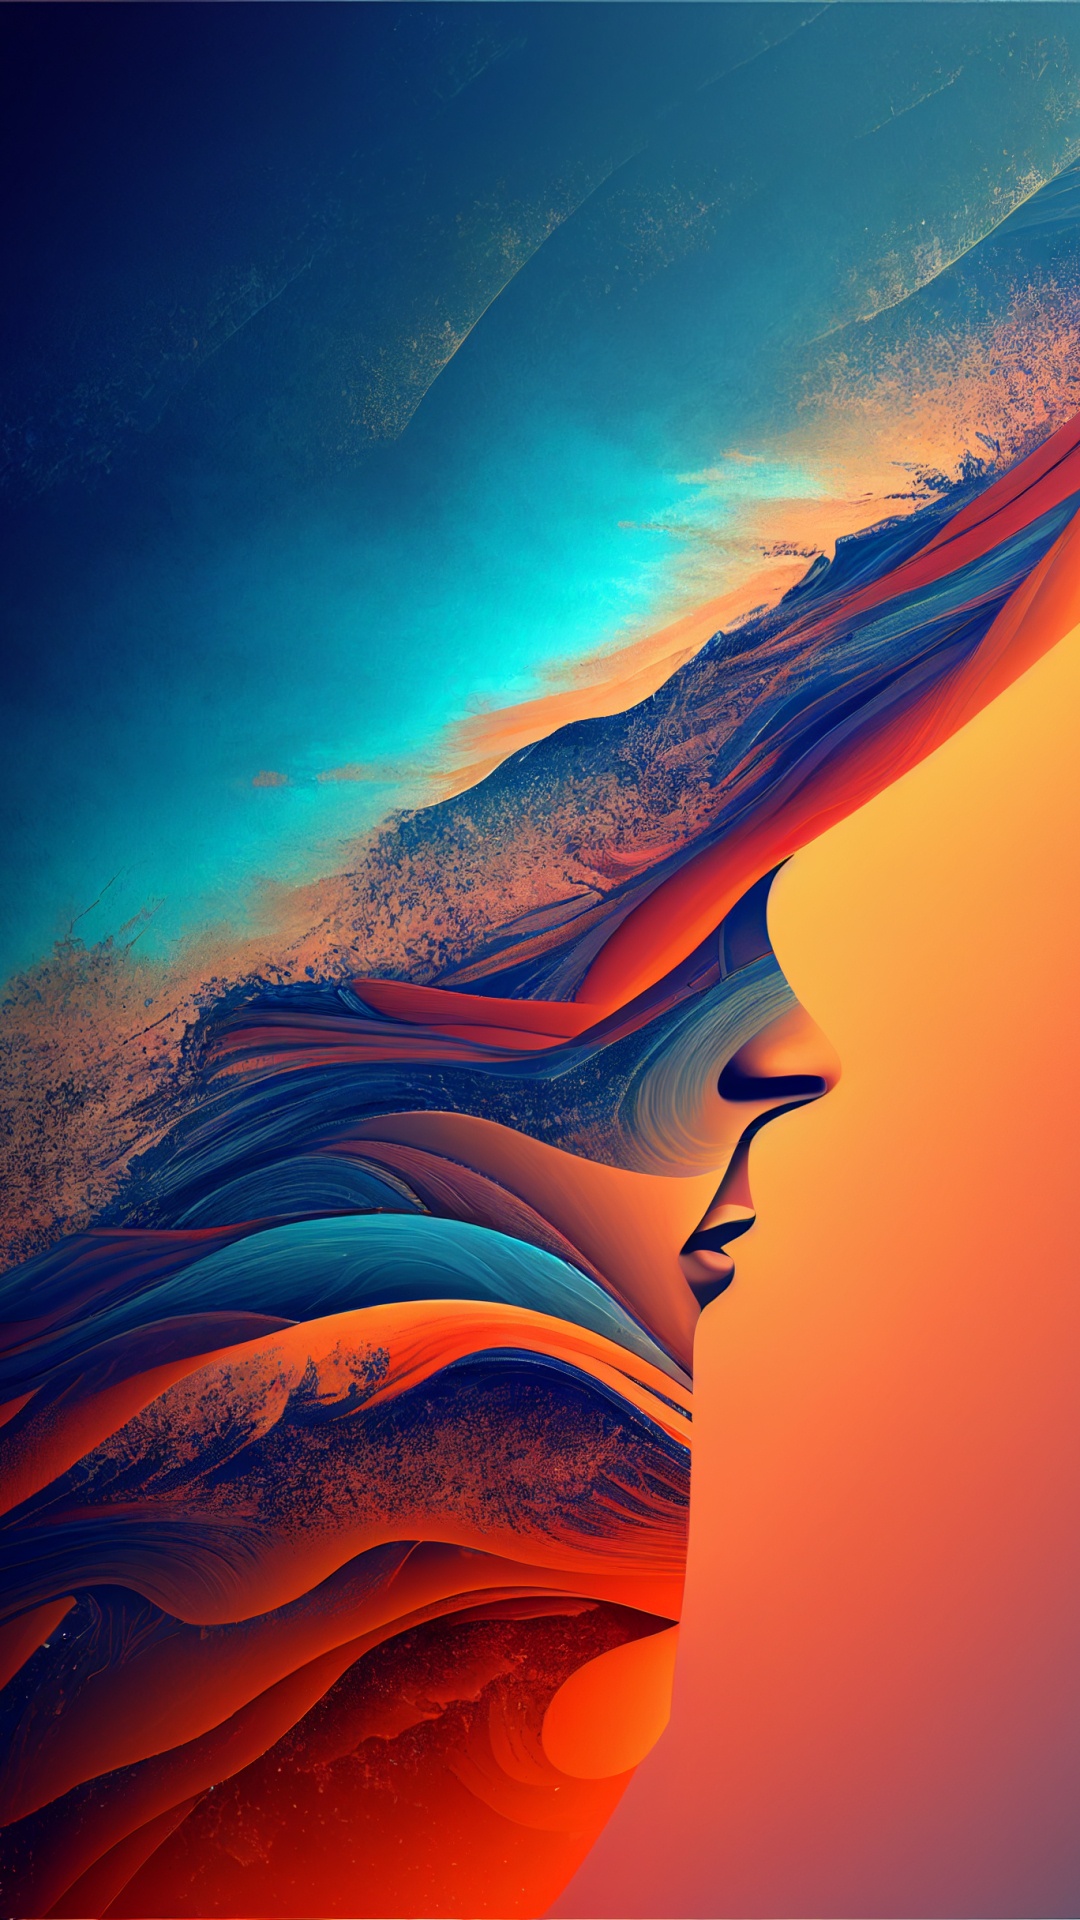 Download A colorful abstract landscape Wallpaper | Wallpapers.com